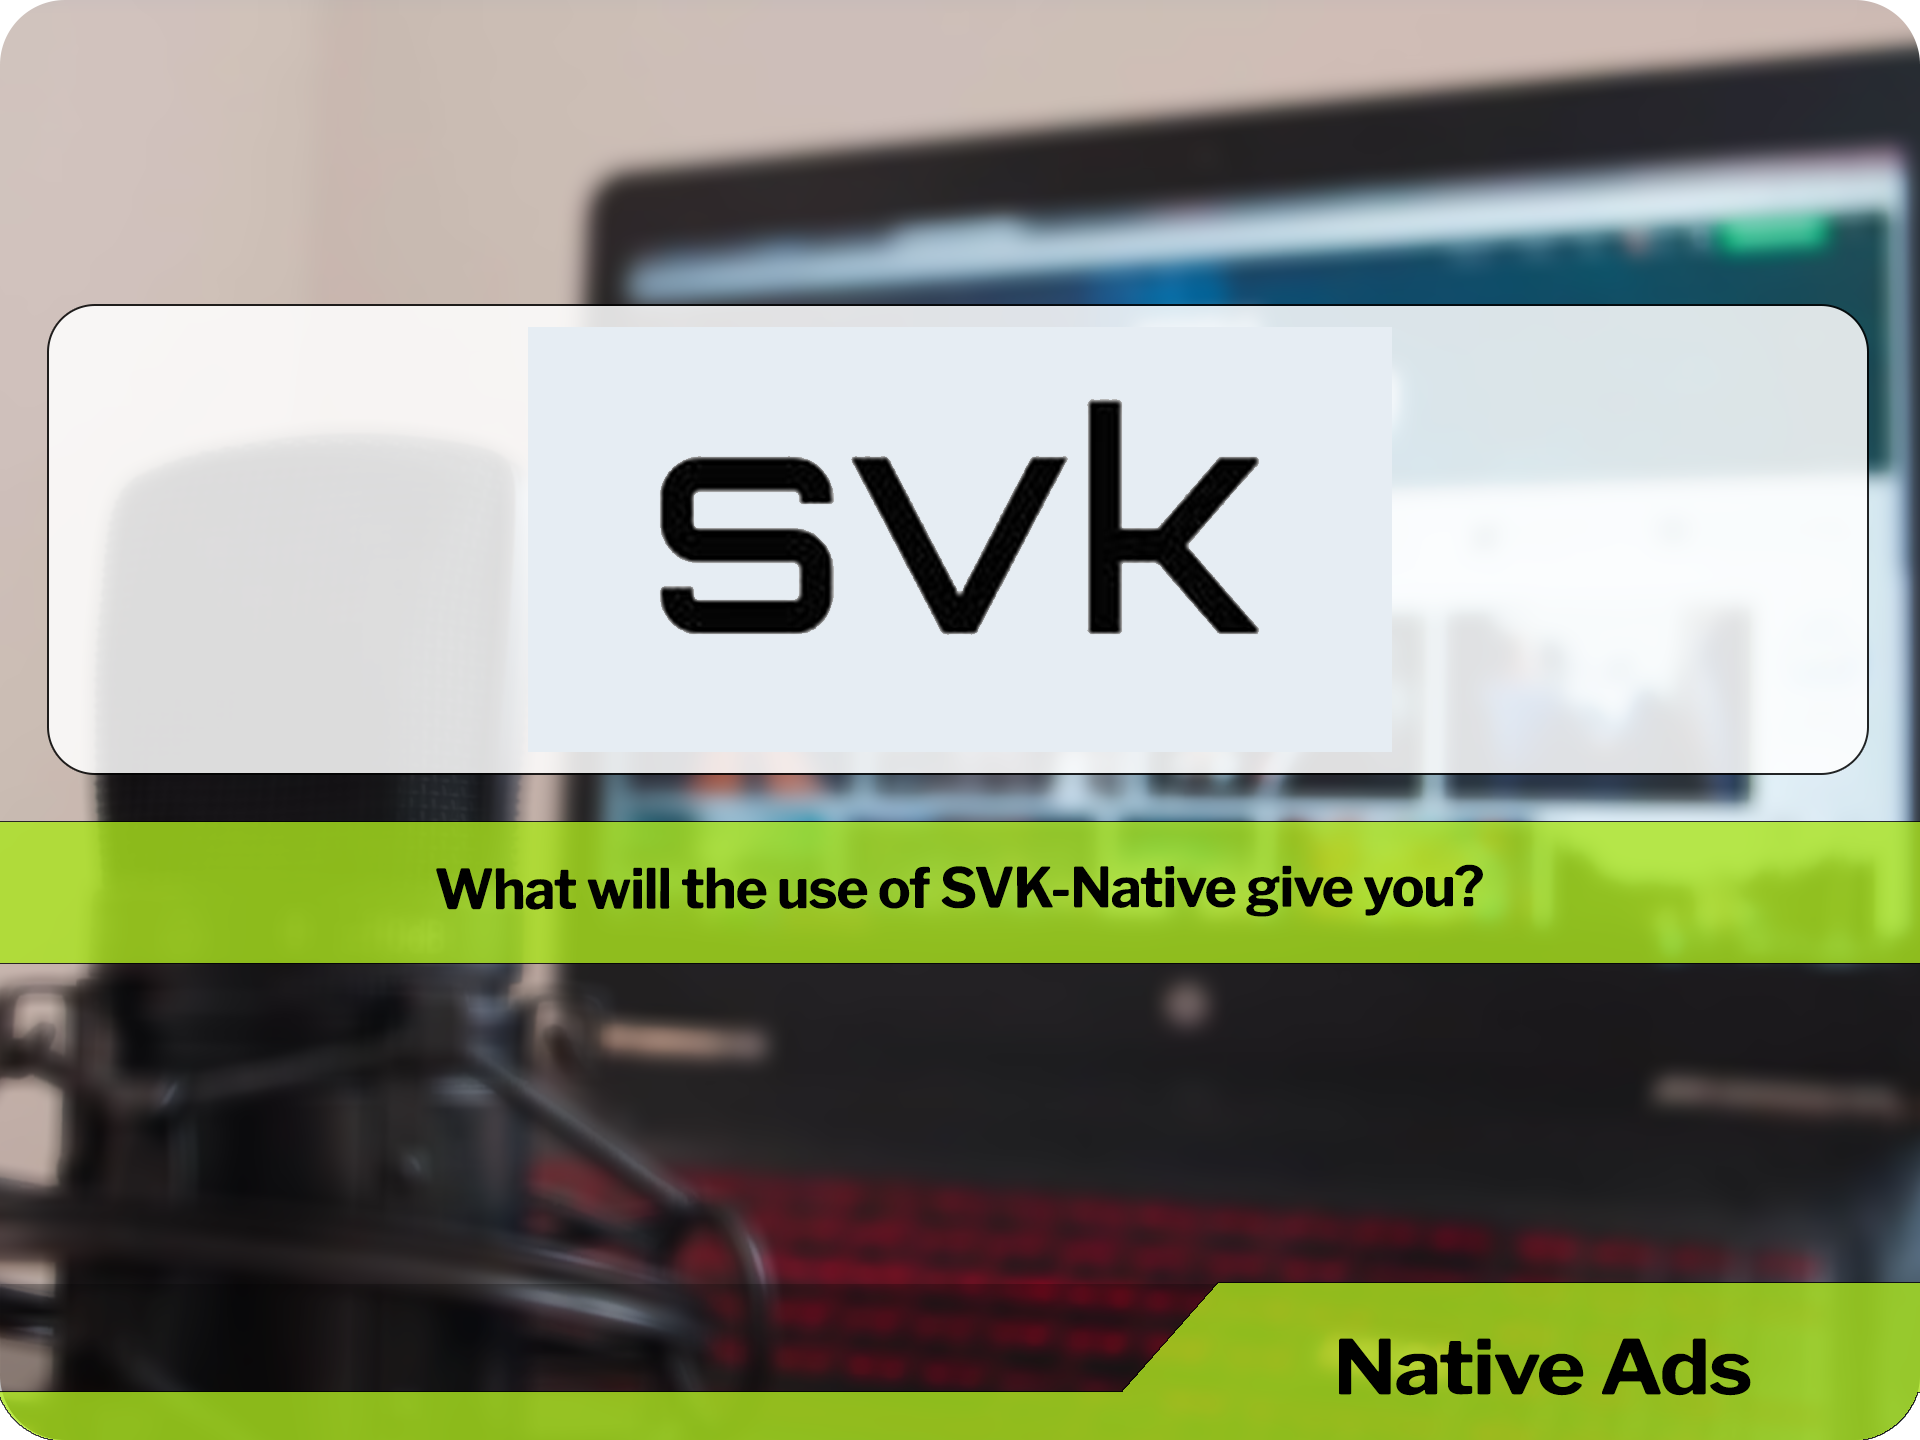 How to create native advertising effectively with SVK-Native?